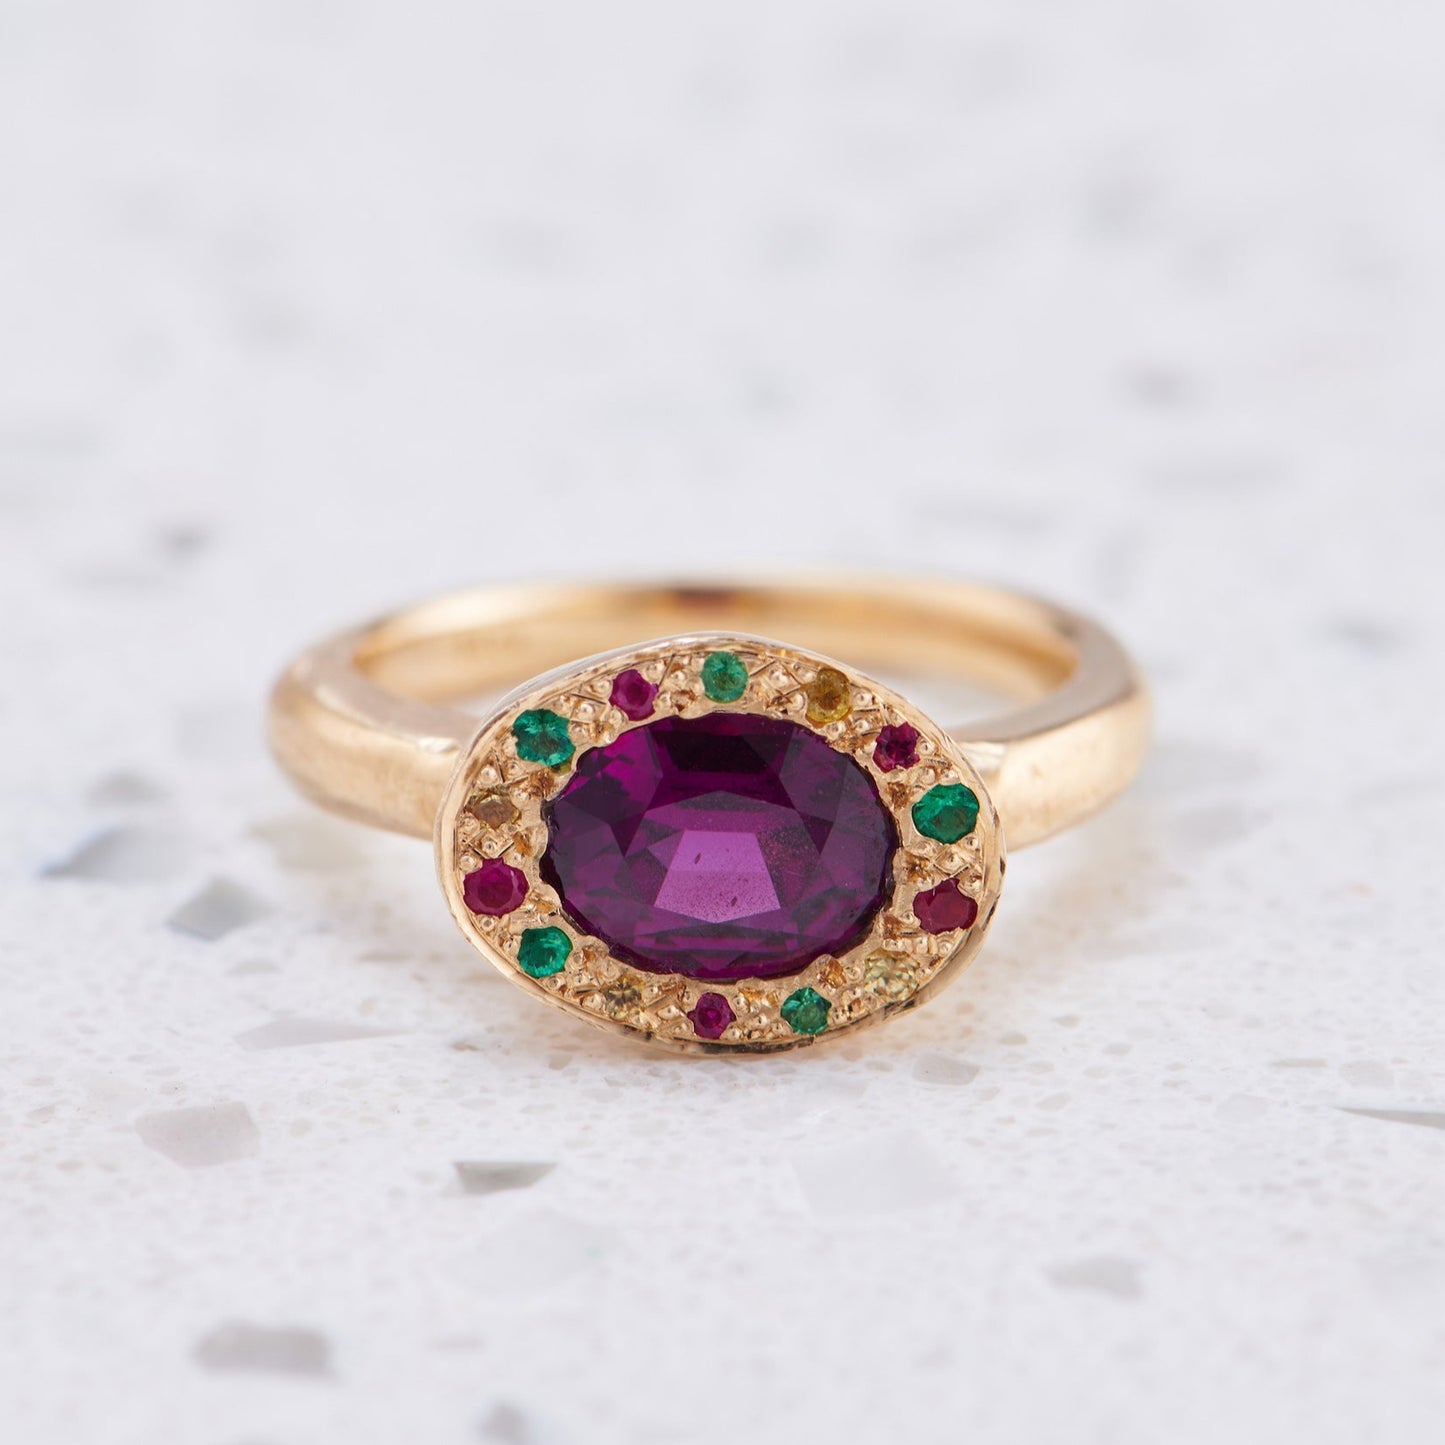 Purple Garnet Eclipse Ring in 14ct Yellow Gold, Size P and a half (In Stock)